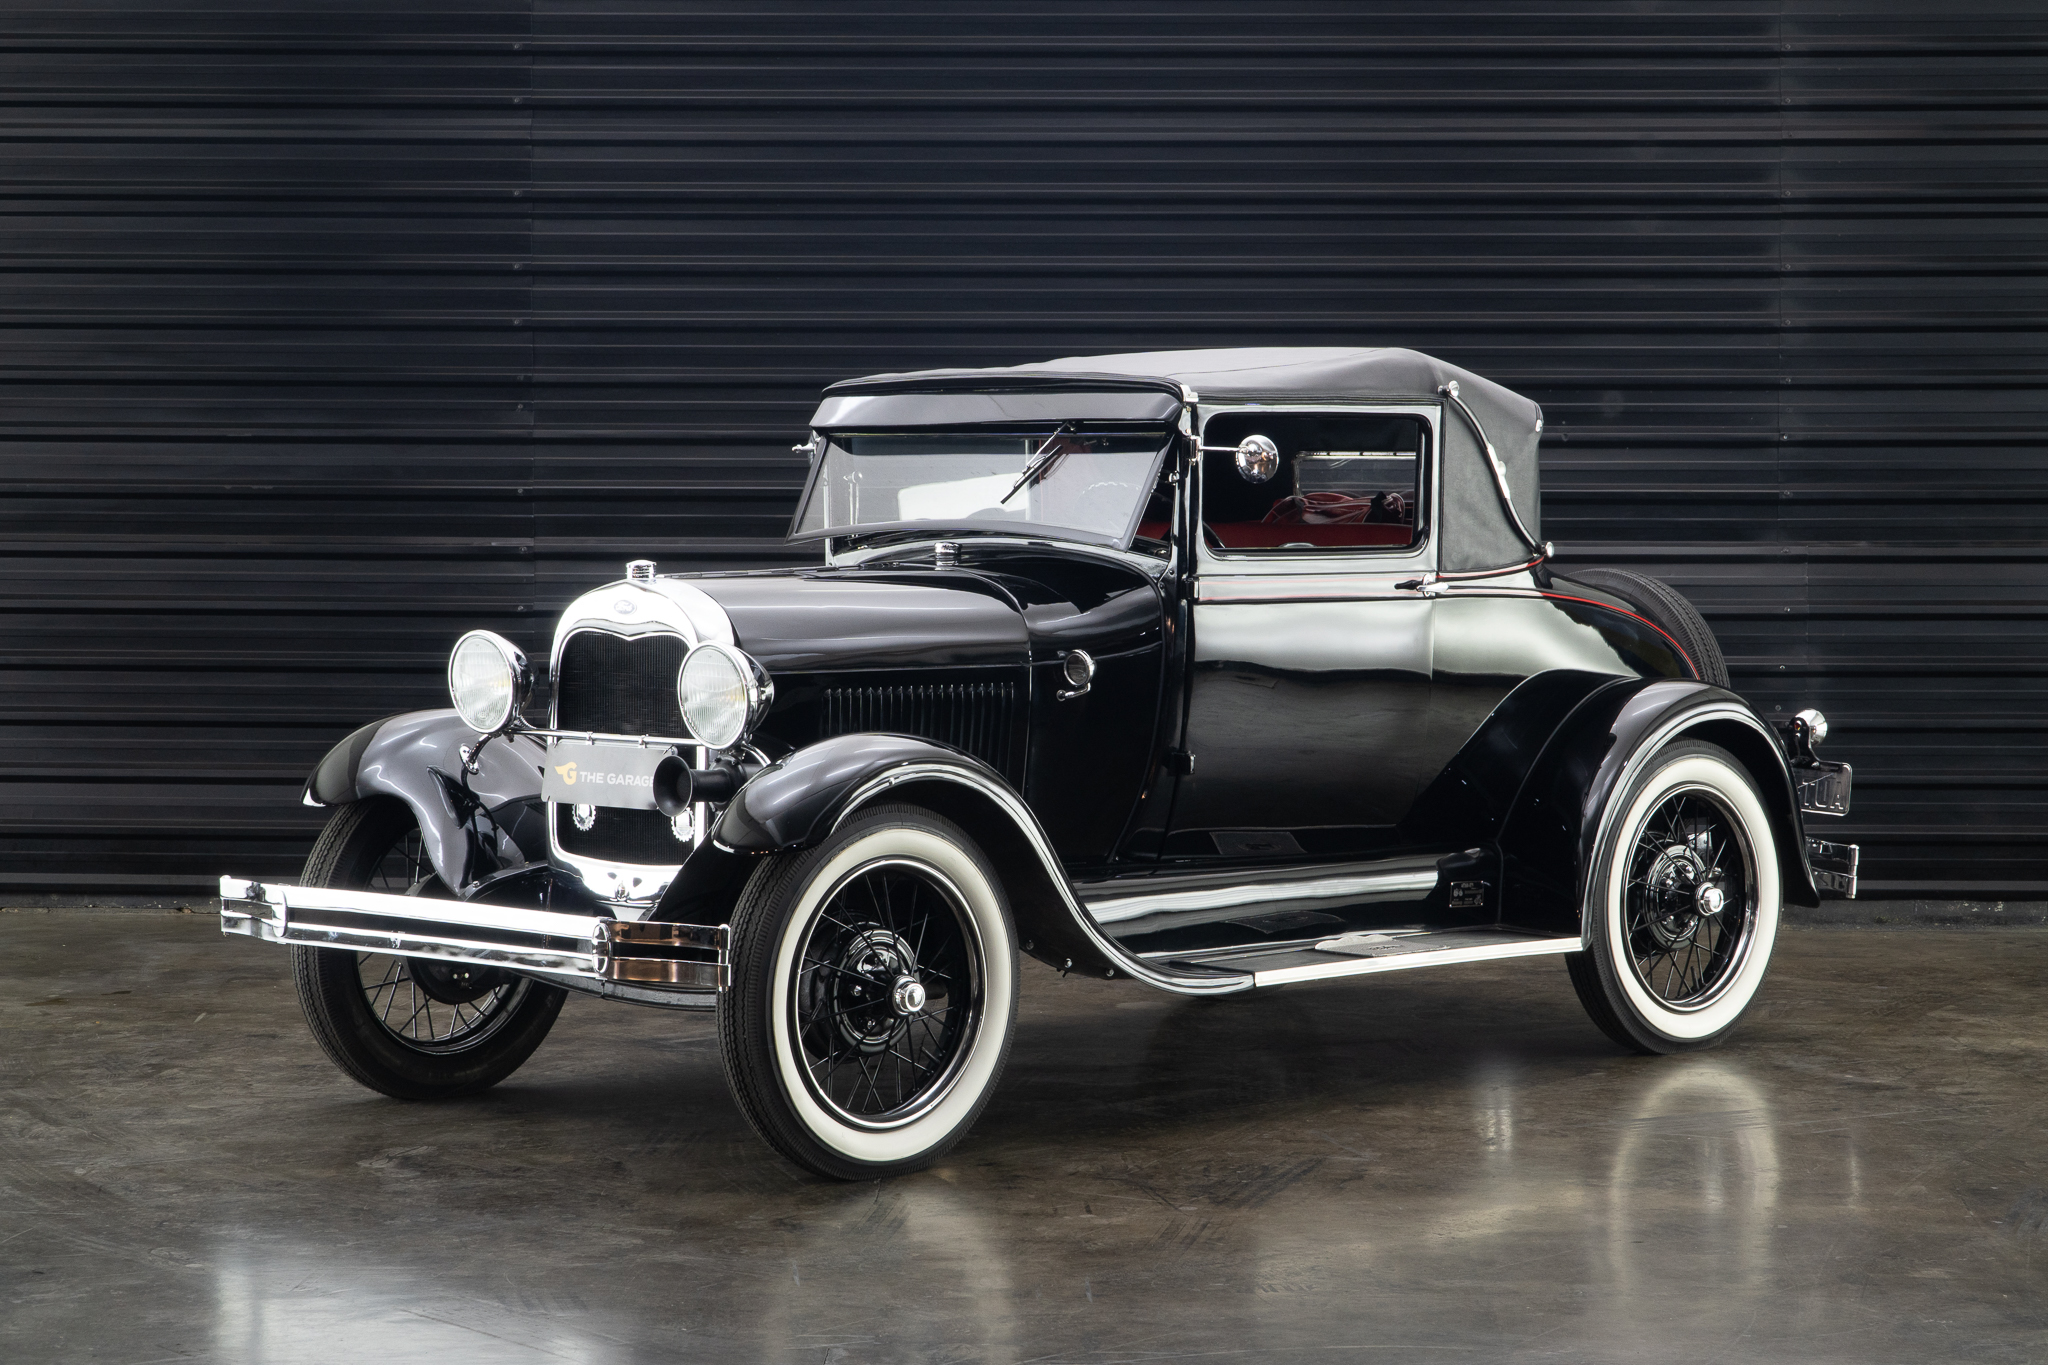 1929 Ford Roadster a venda for sale the garage